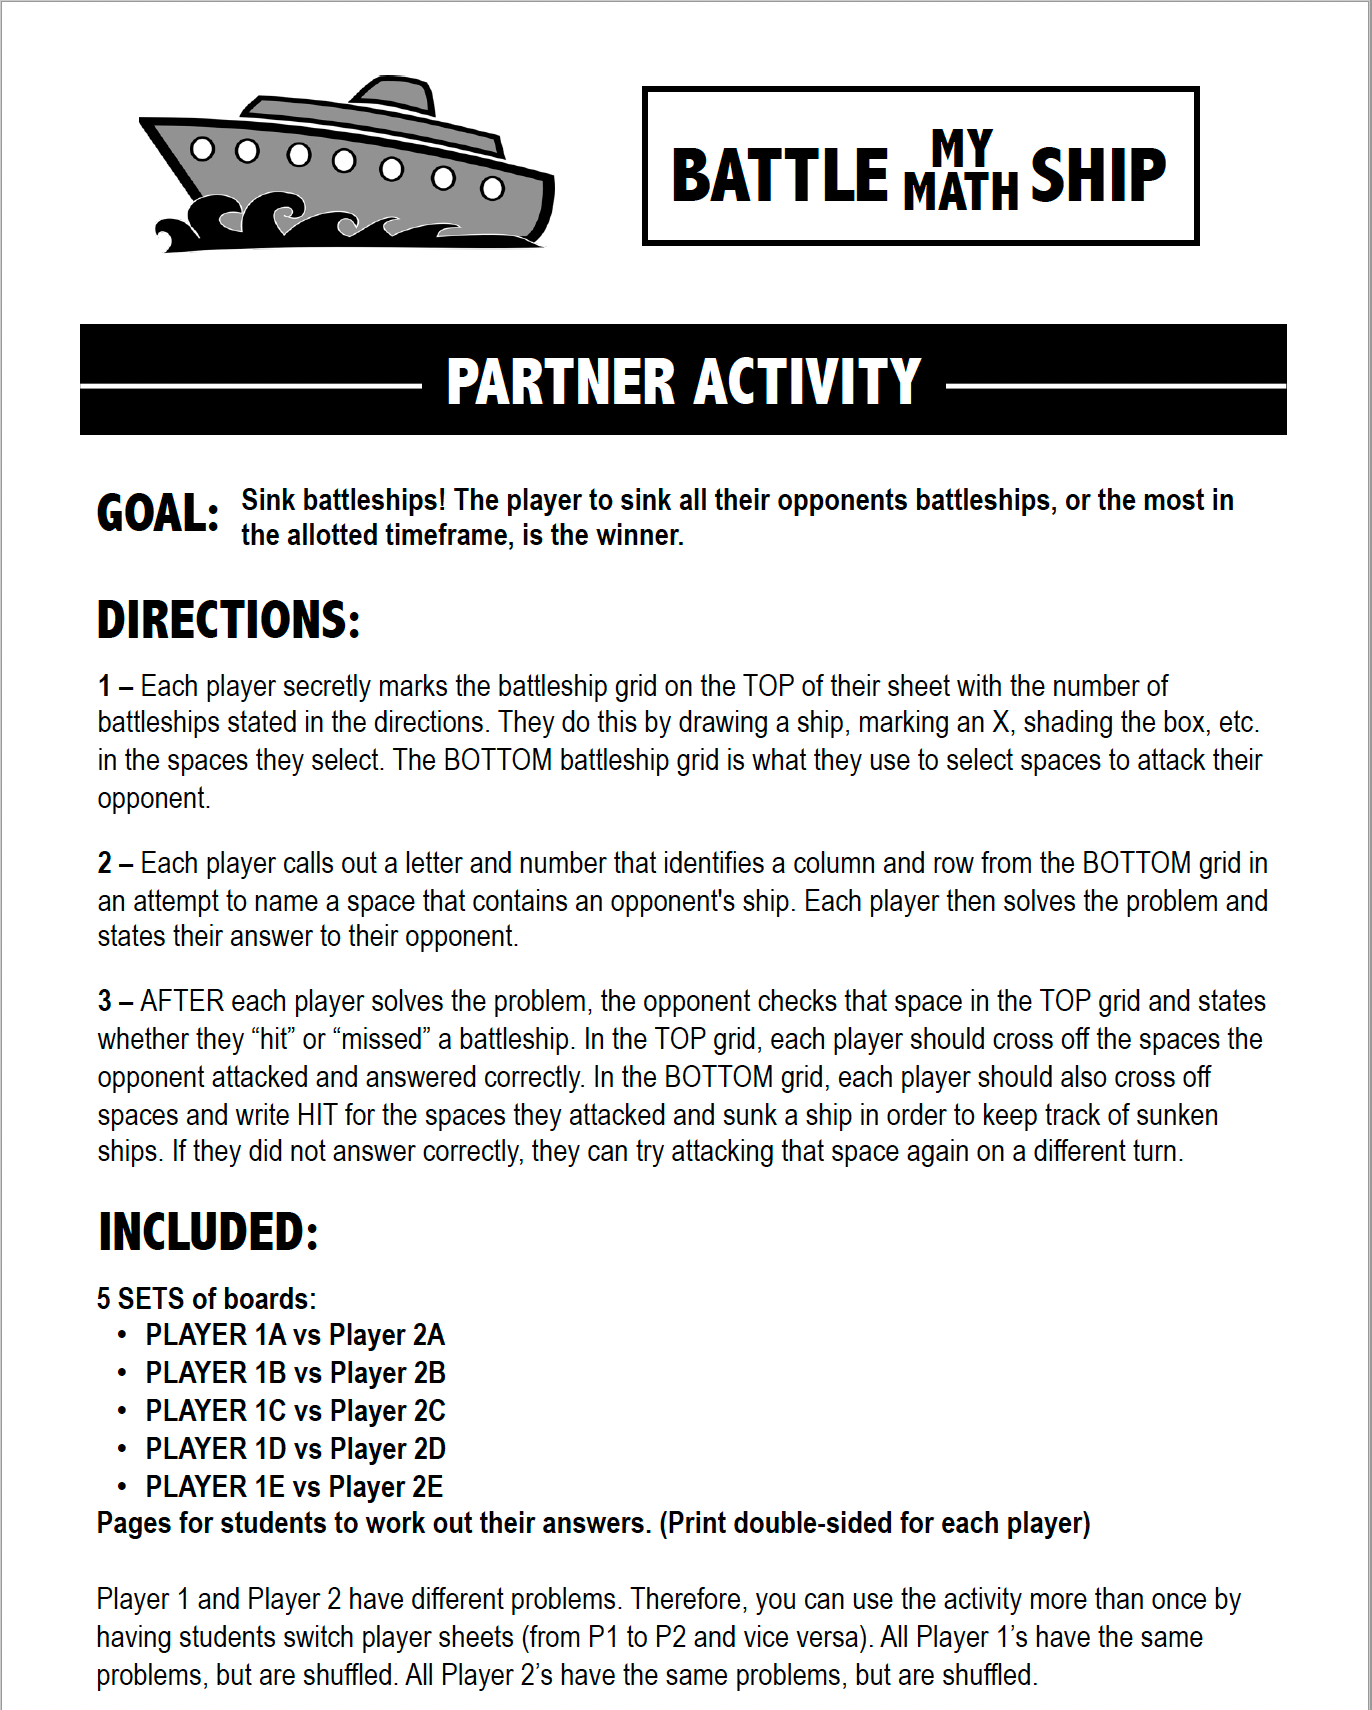 Two-Step Equations Activity | Battle My Math Ship Game